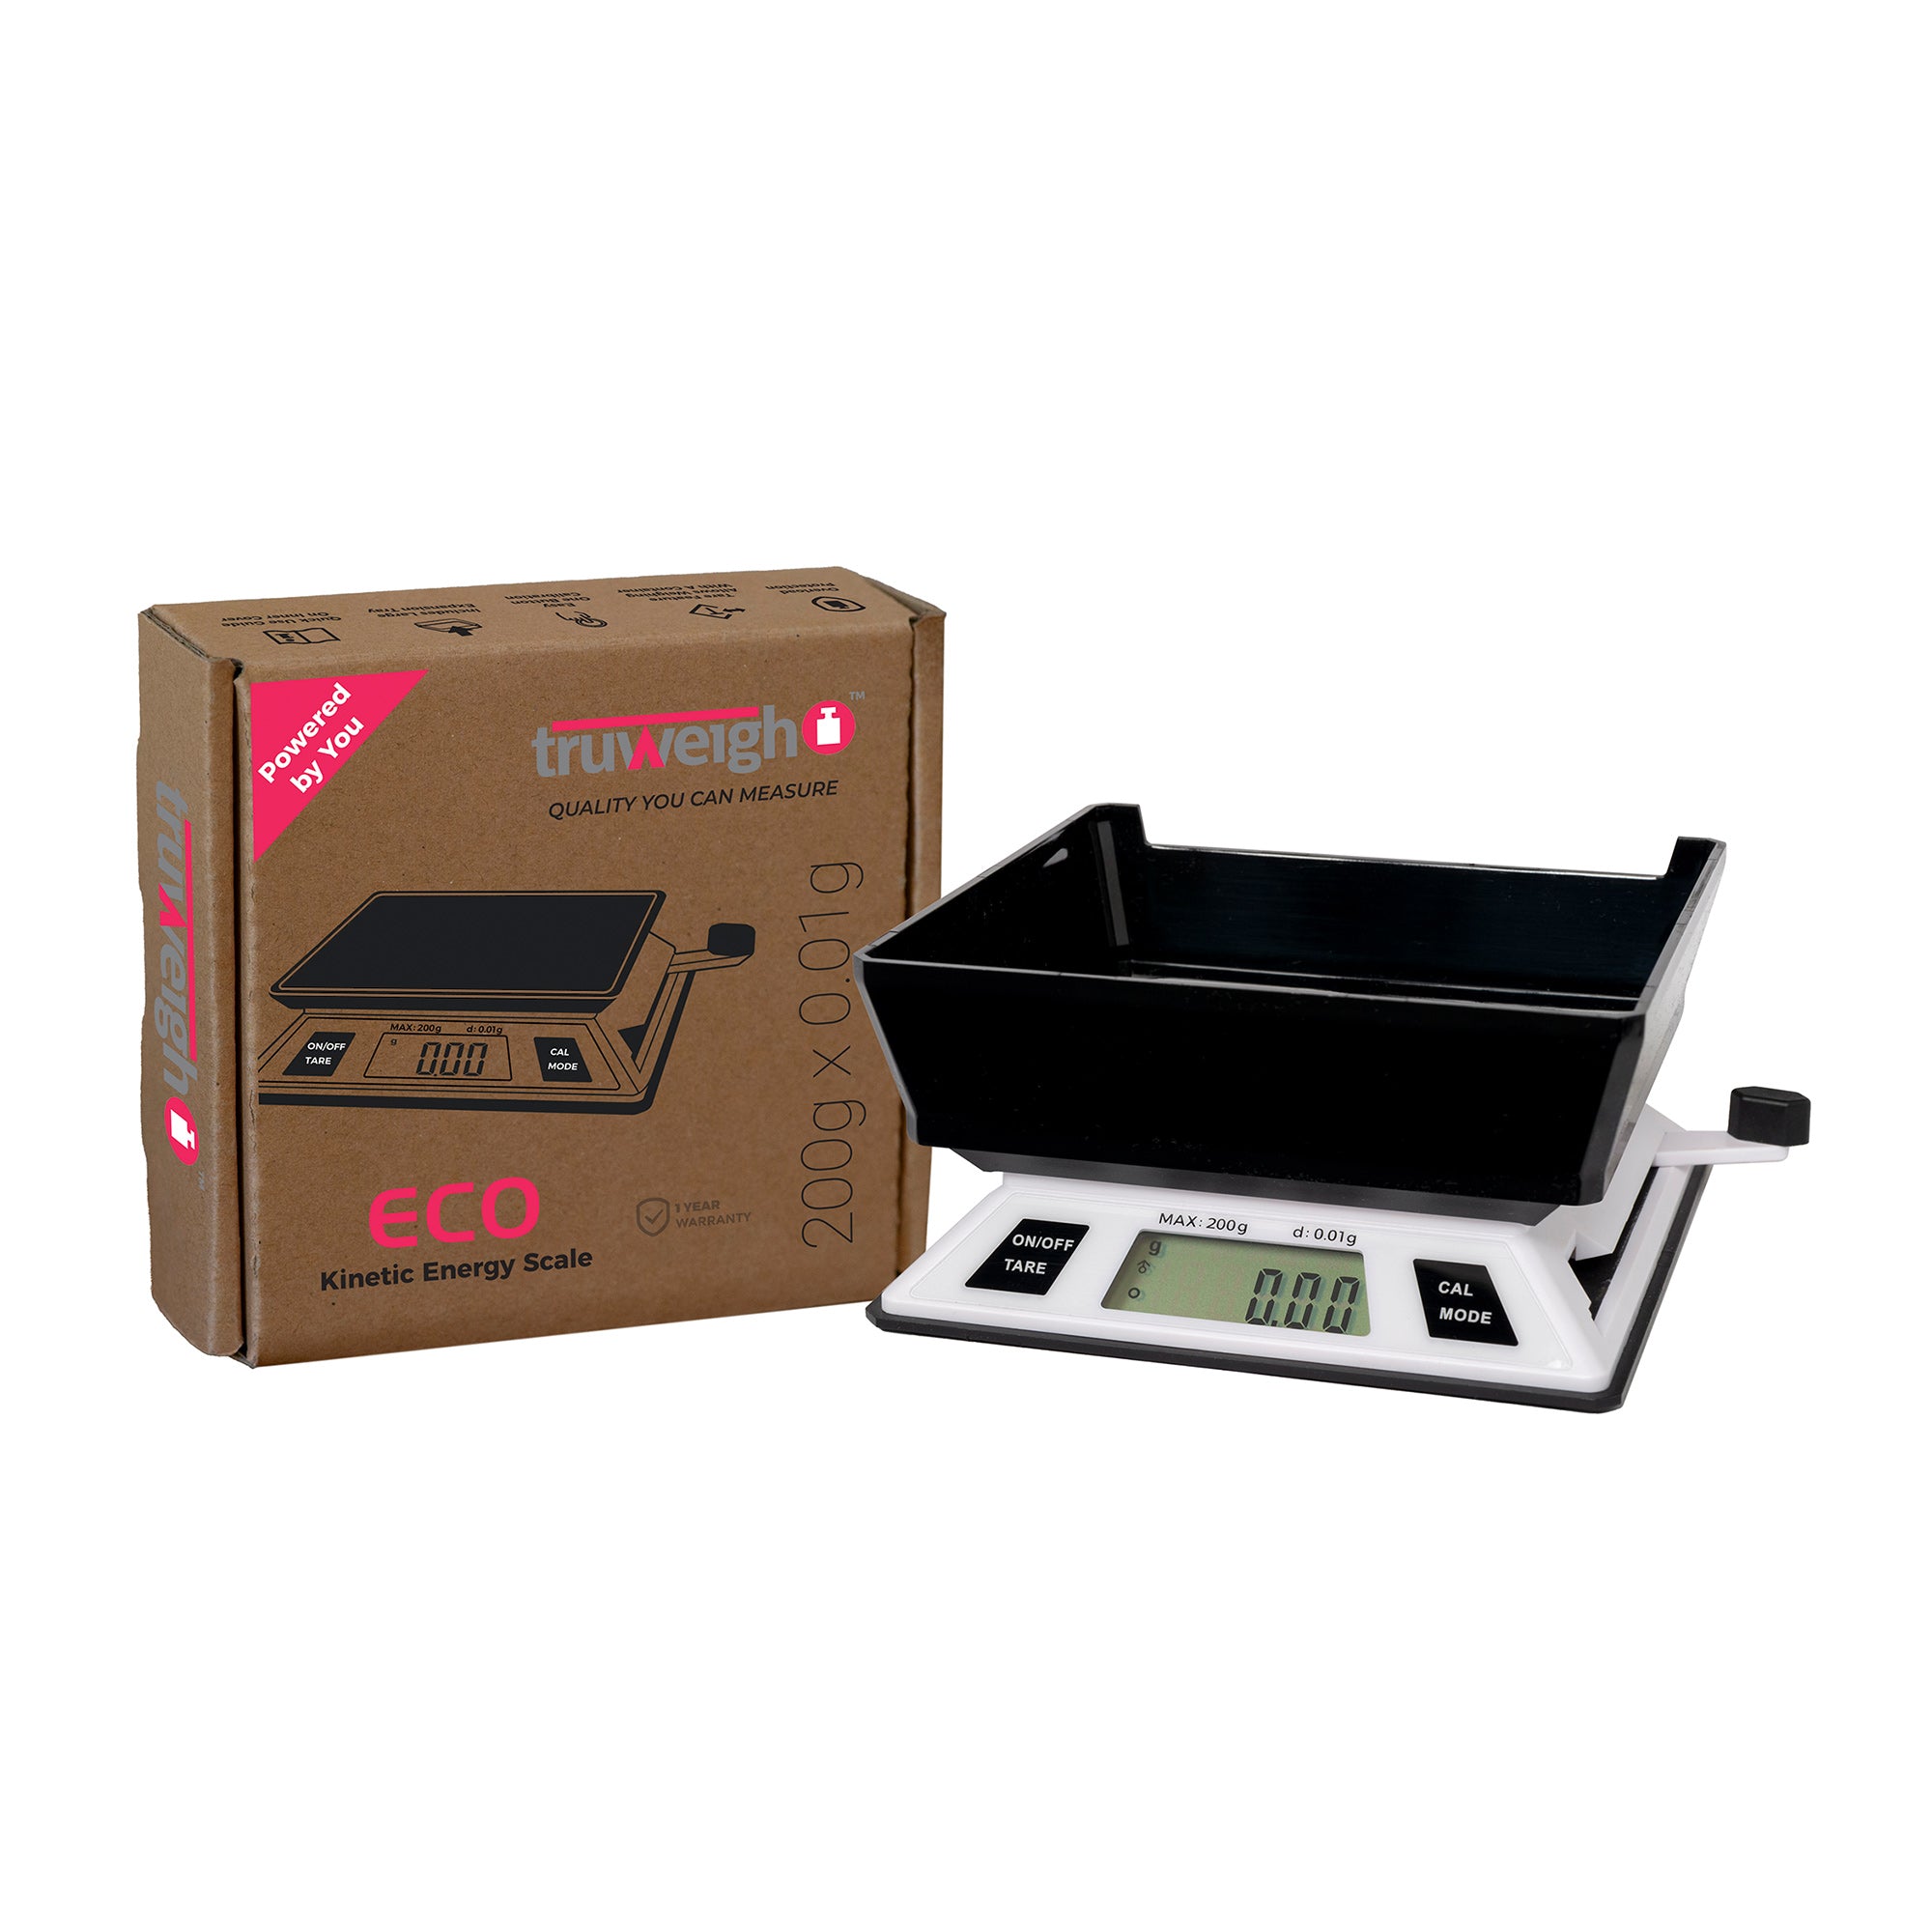 The Truweigh ECO Kinetic Energy scale is turned on, sitting next to the box